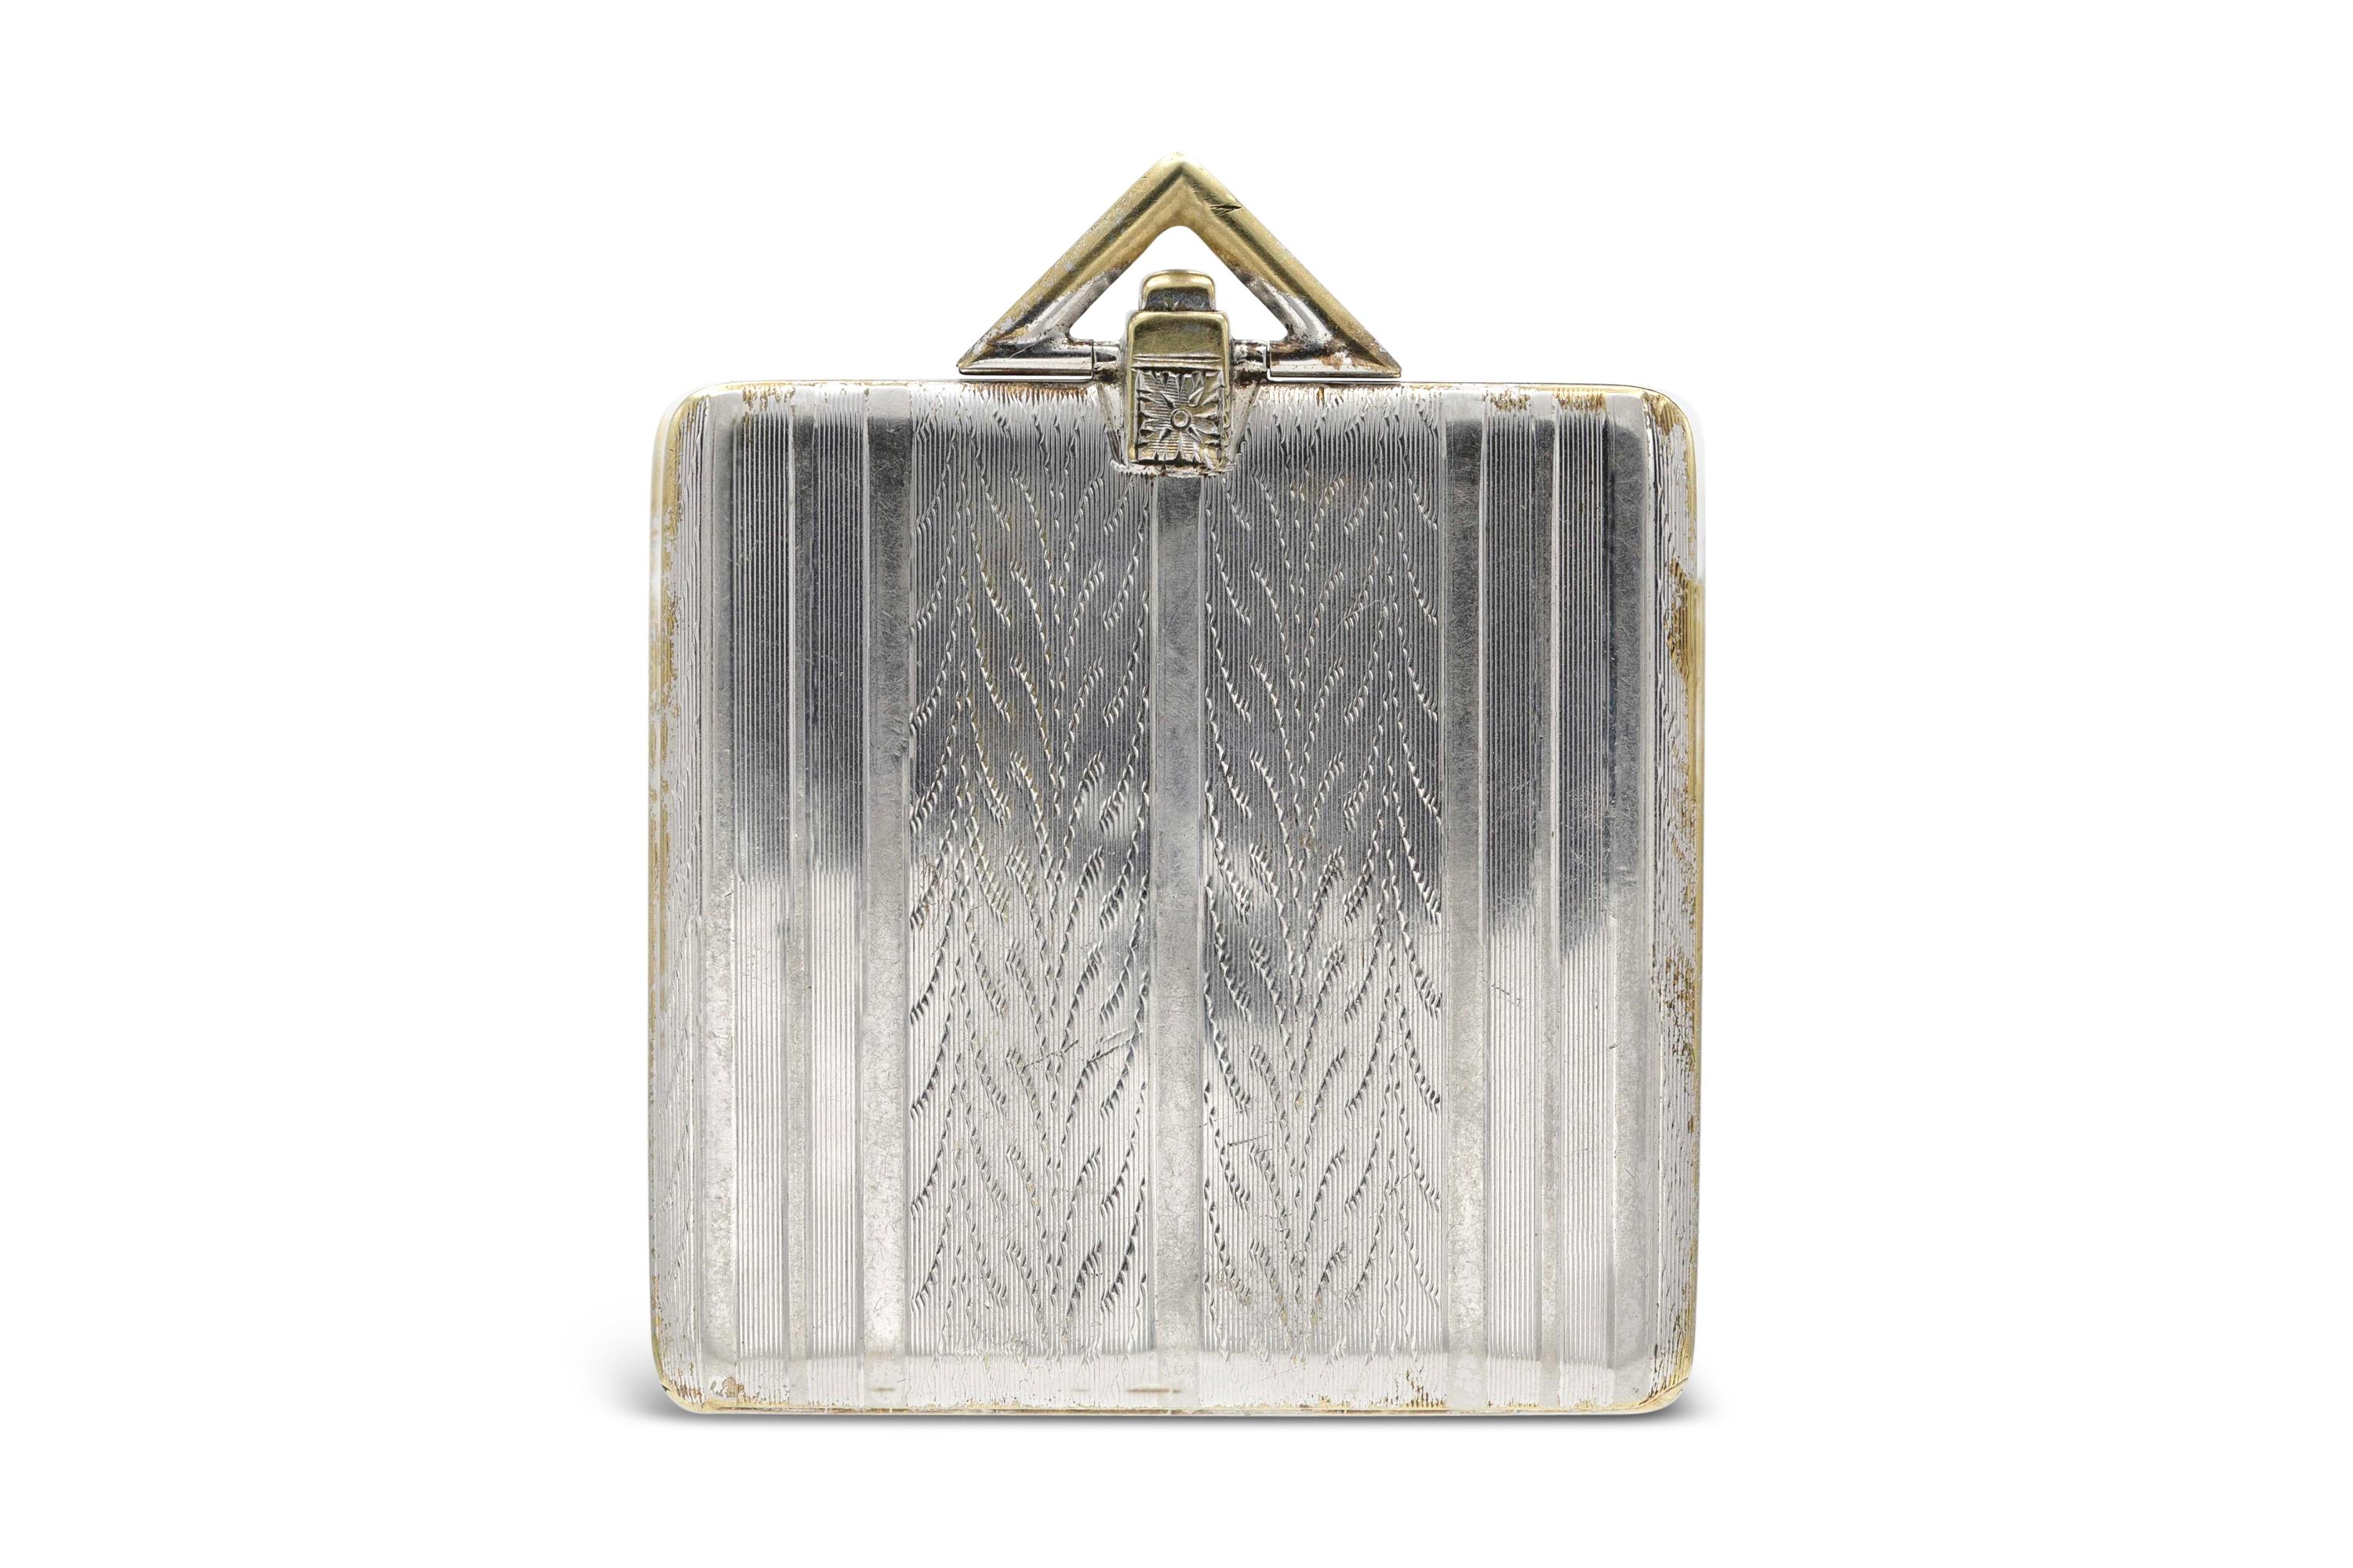 Finely crafted in 14k white gold.
Signed by Tiffany & Co.
Art Deco, circa 1920s
1 5/8